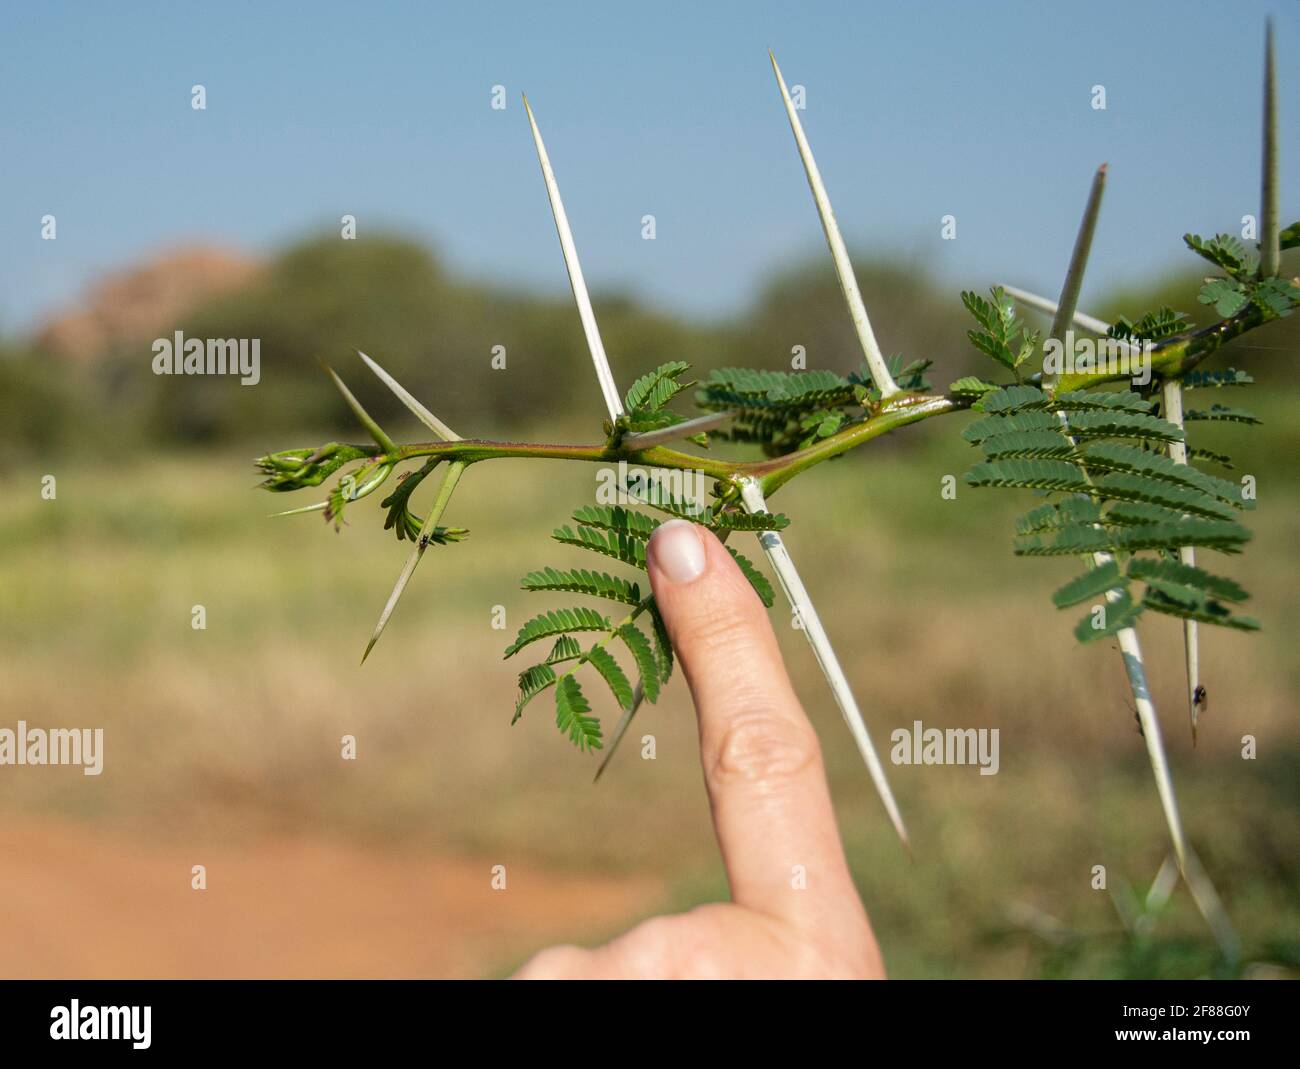 three inch long thorns on a Acacia tree in Kenya, used to prevent herbivore animals from eating the leaves Stock Photo